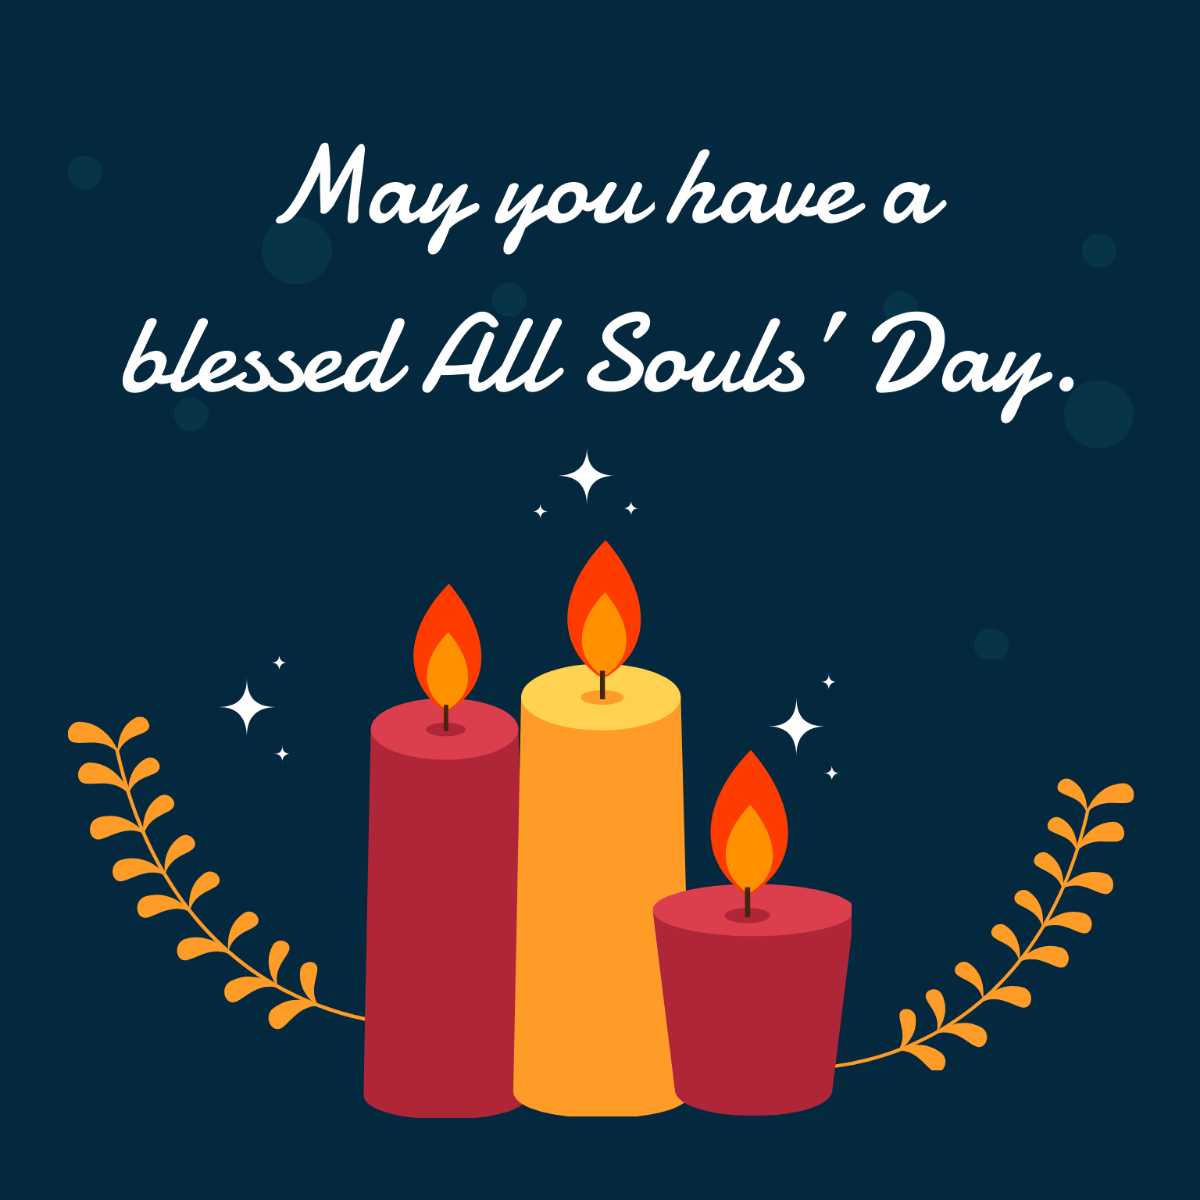 All Souls' Day Wishes Vector Template